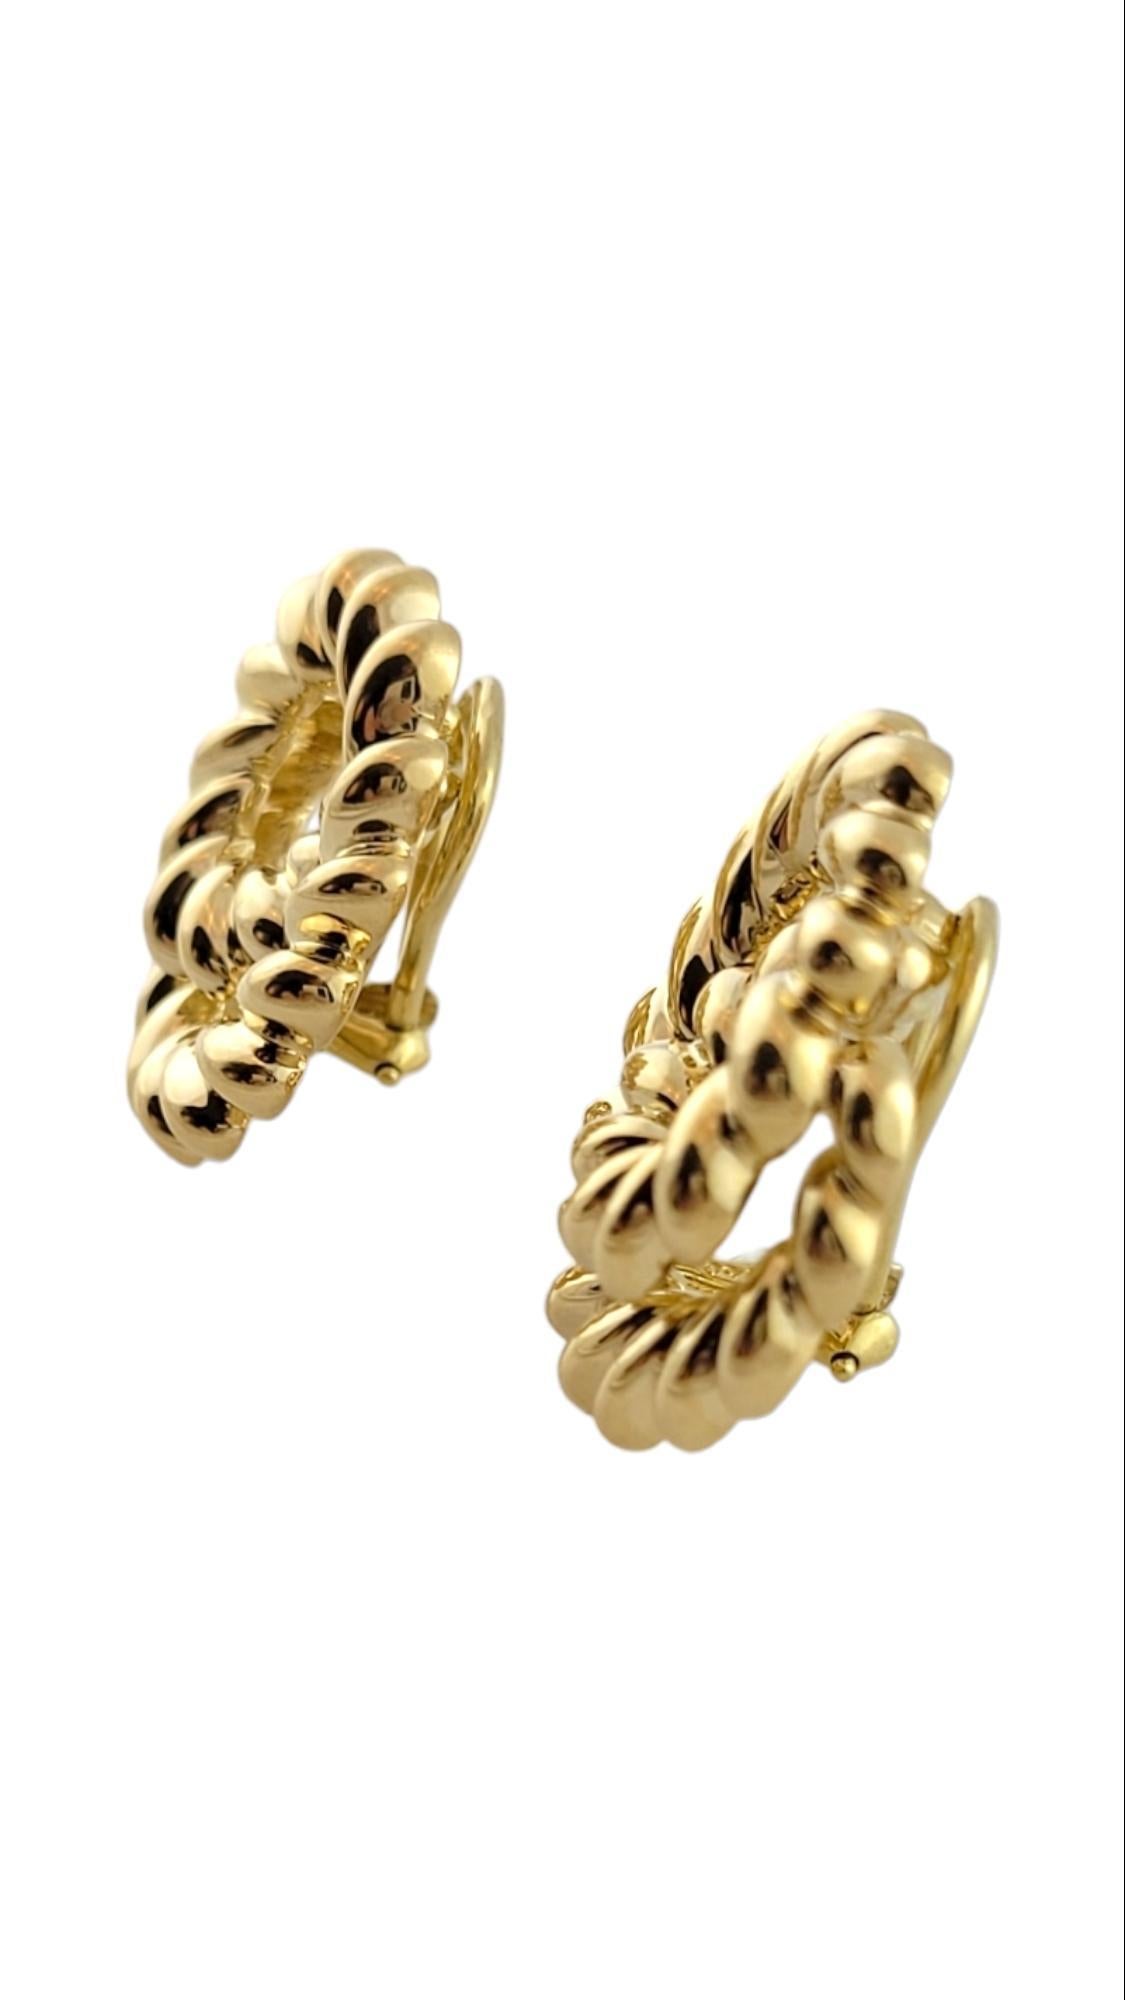 Vintage Tiffany & Co. 18K yellow Gold Coiled Rope Clip on Earrings

This gorgeous set of 18K gold earrings designed by Tiffany & Co feature a gorgeous, coiled rope design!

Size: 23mm

Weight: 22.07 g/ 14.19 dwt

Hallmark: Tiffany & Co 750

Will be